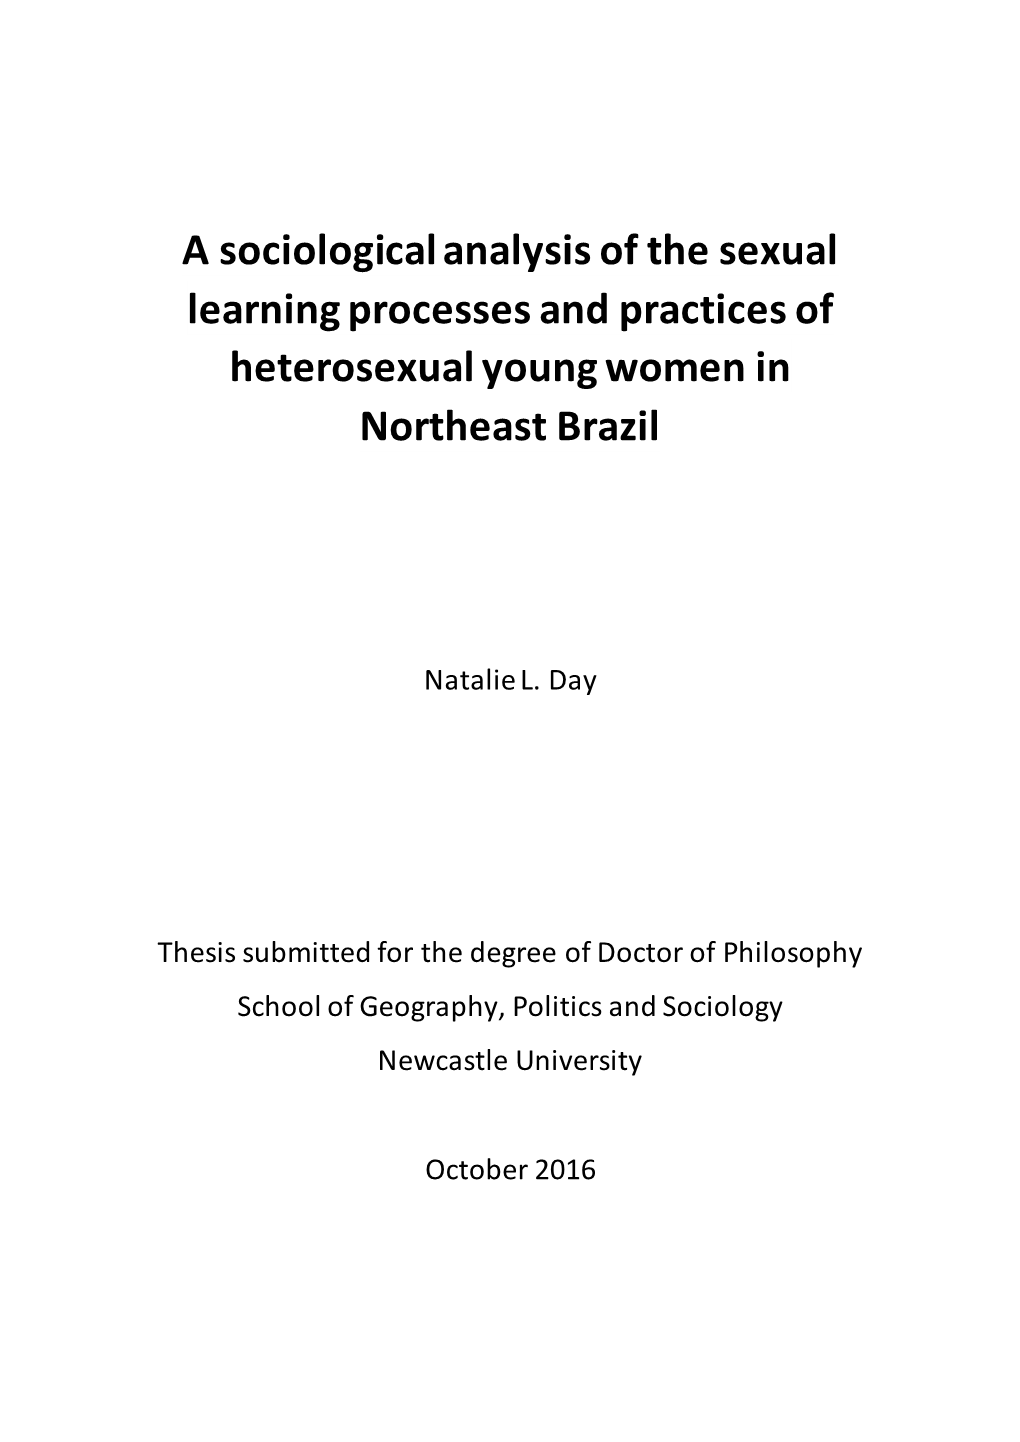 A Sociological Analysis of the Sexual Learning Processes and Practices of Heterosexual Young Women in Northeast Brazil